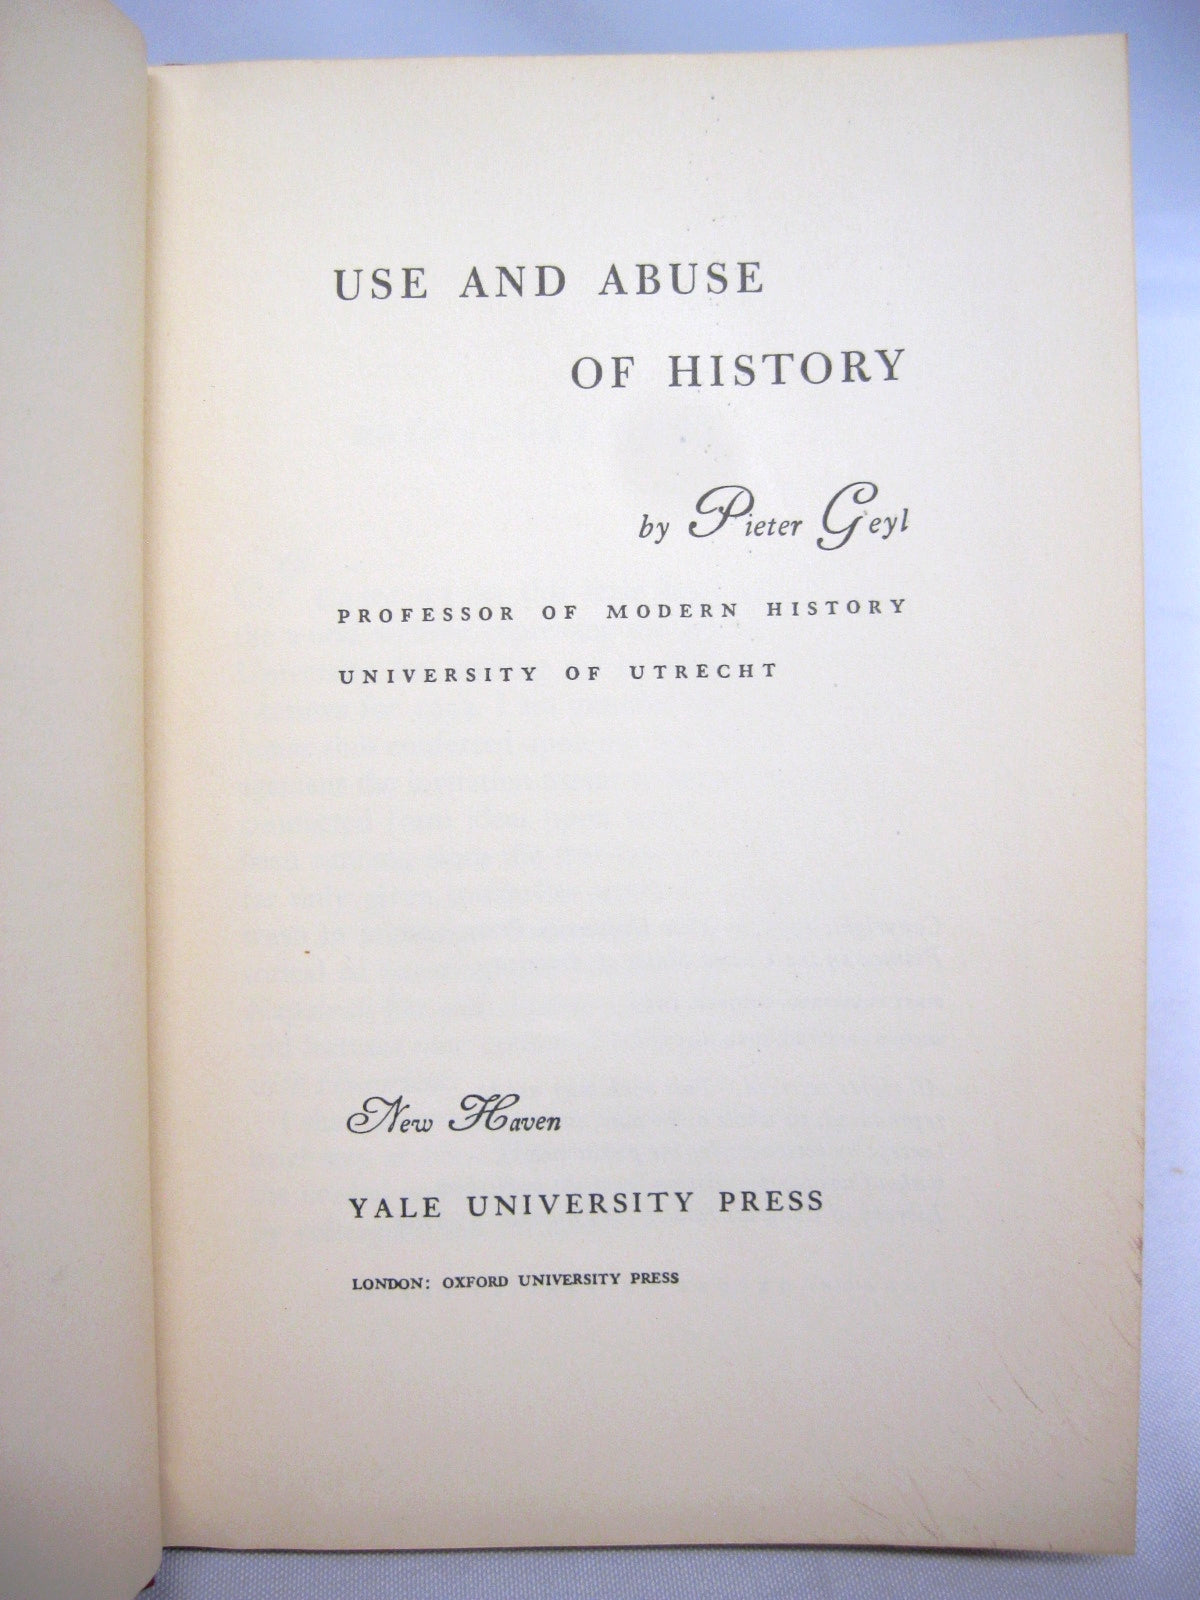 Use and Abuse of History by Pieter Geyl